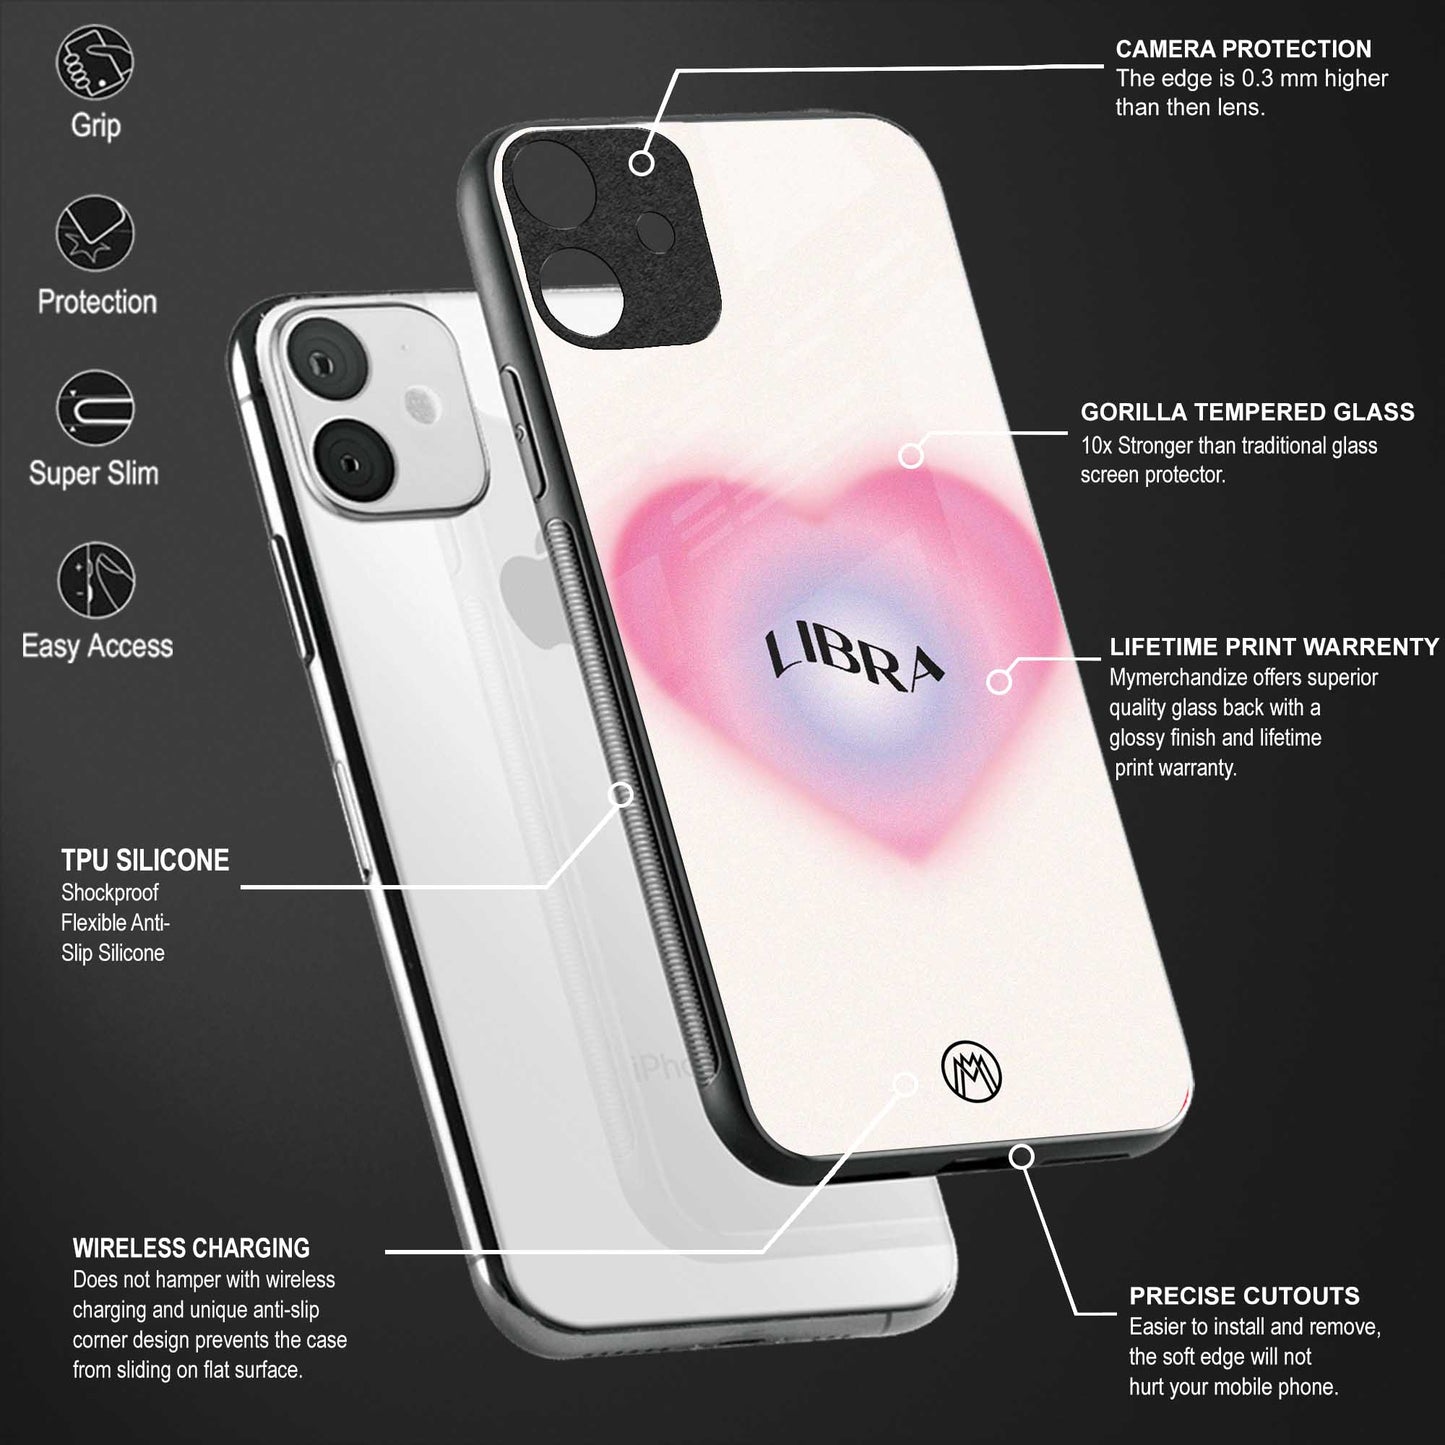 libra minimalistic back phone cover | glass case for samsung galaxy m33 5g